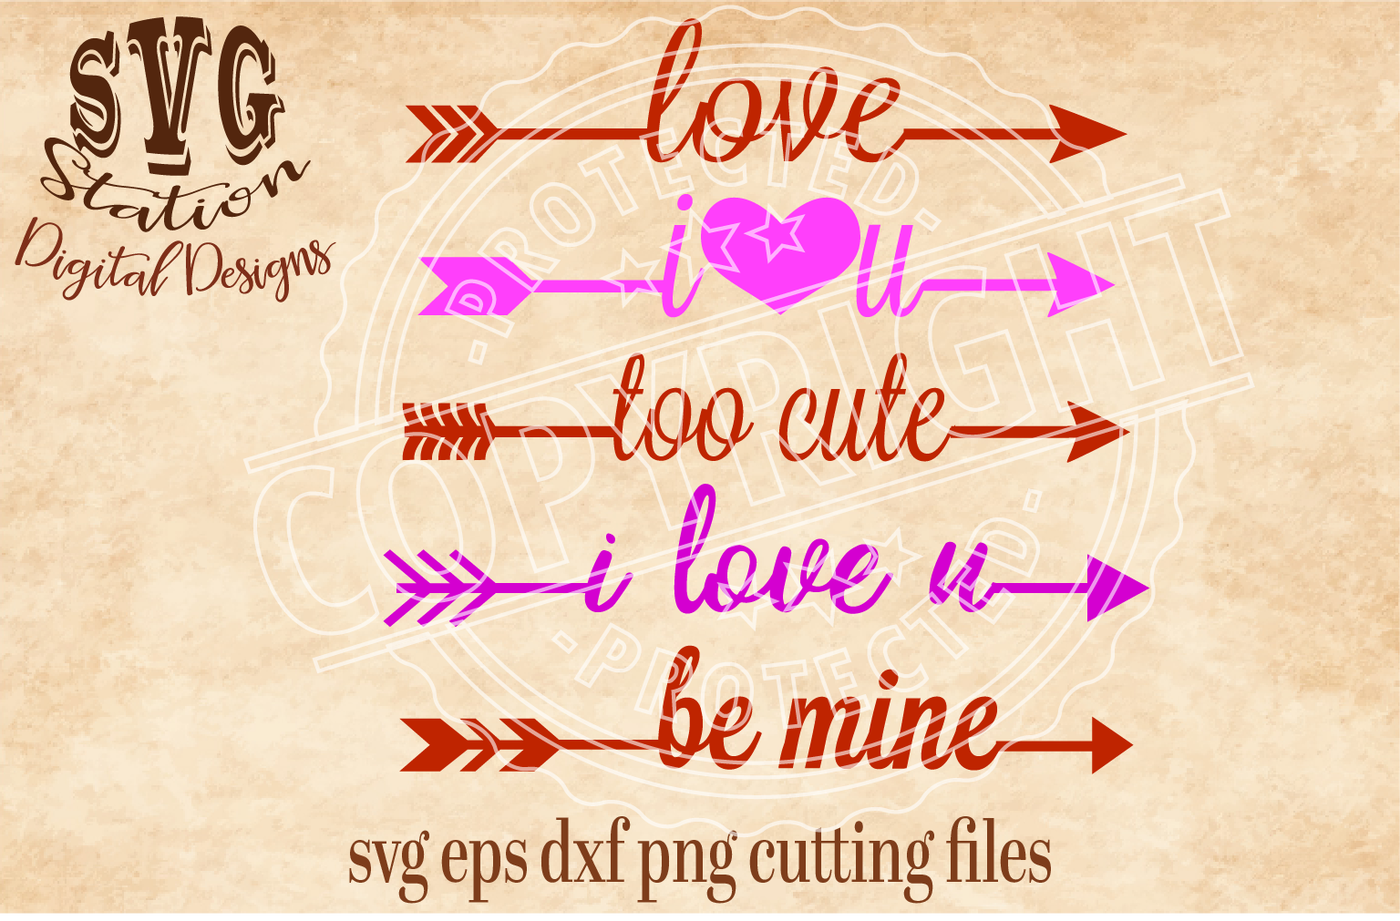 ori 49997 2225c52a97d6115bfea0bc1b808b4e3b1a544c49 valentine arrow words svg dxf png eps cutting file silhouette cricut